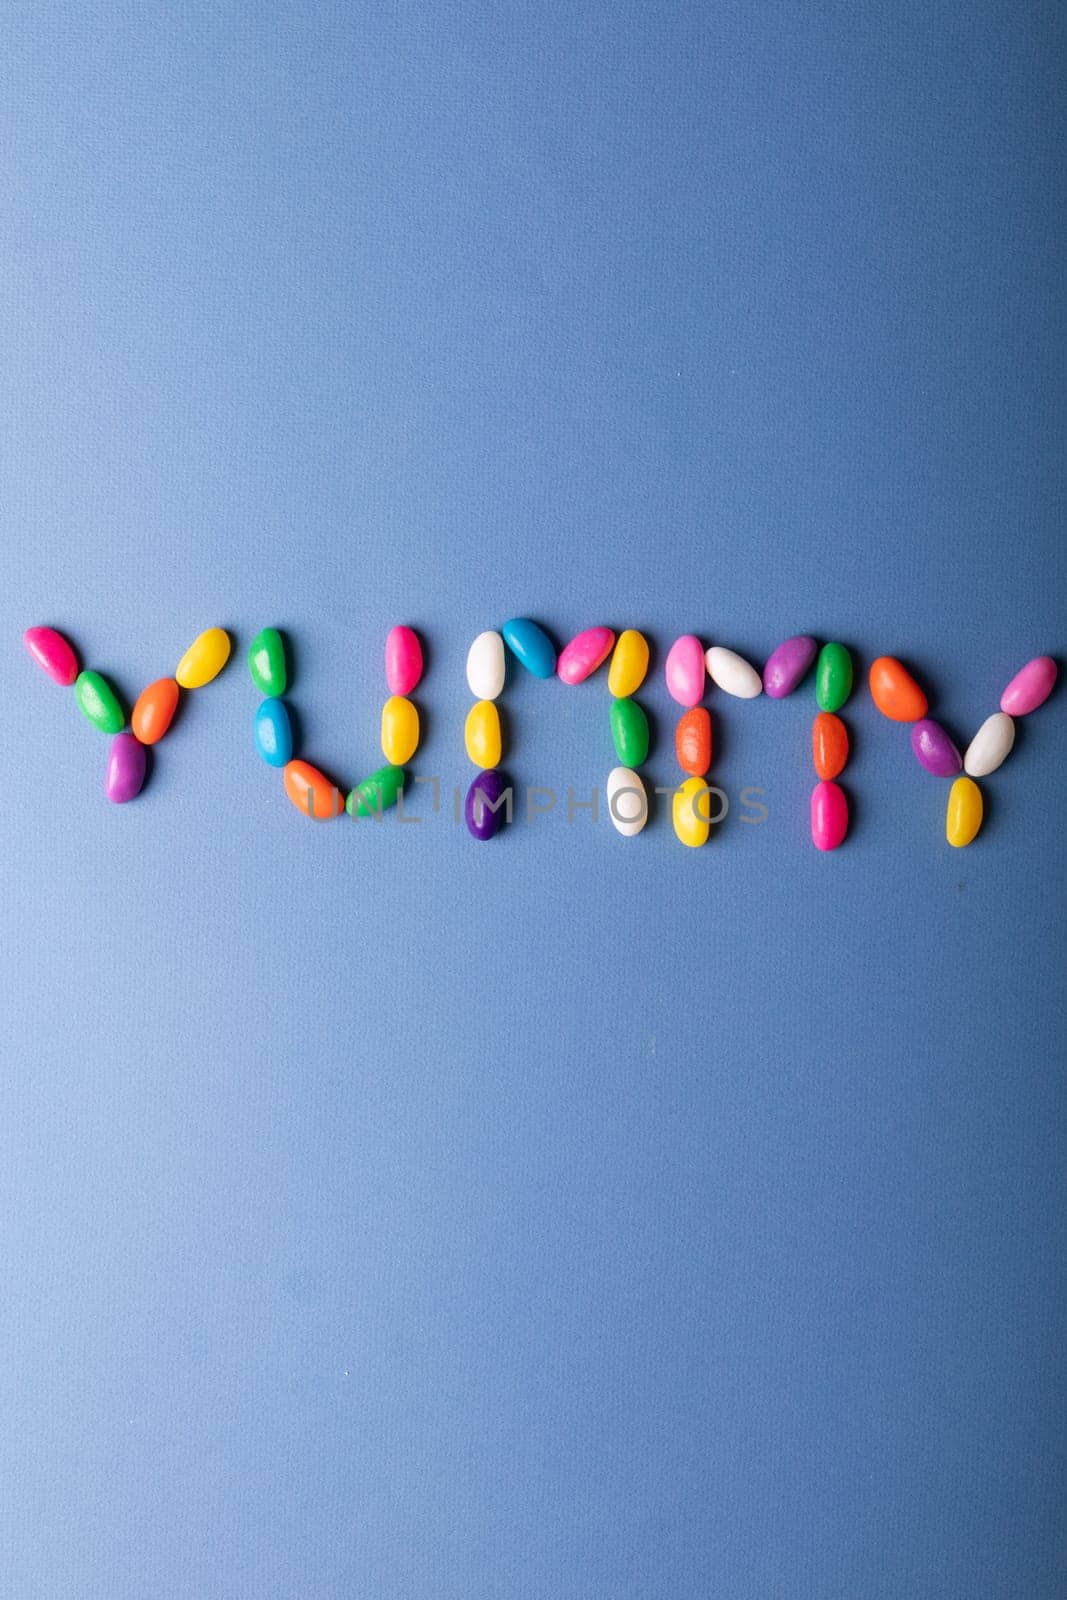 Directly above view of yummy word arranged from colorful candies on blue background over copy space. unaltered, sweet food and unhealthy eating concept.